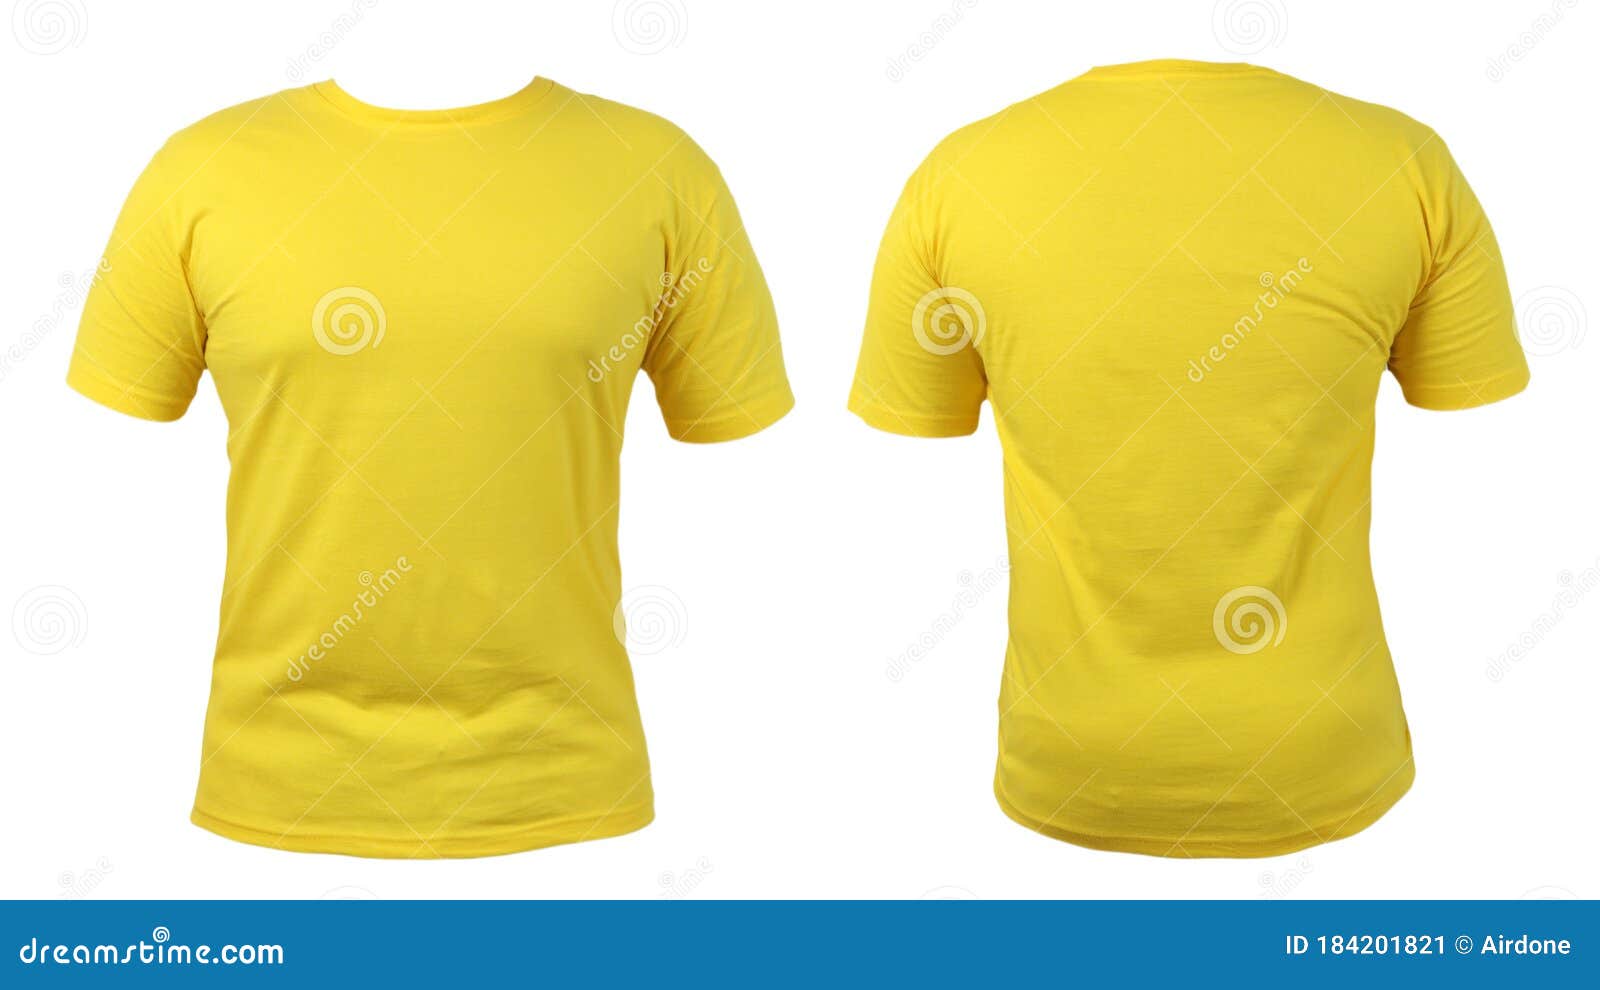 Download Yellow Shirt Design Template Stock Image - Image of front ...